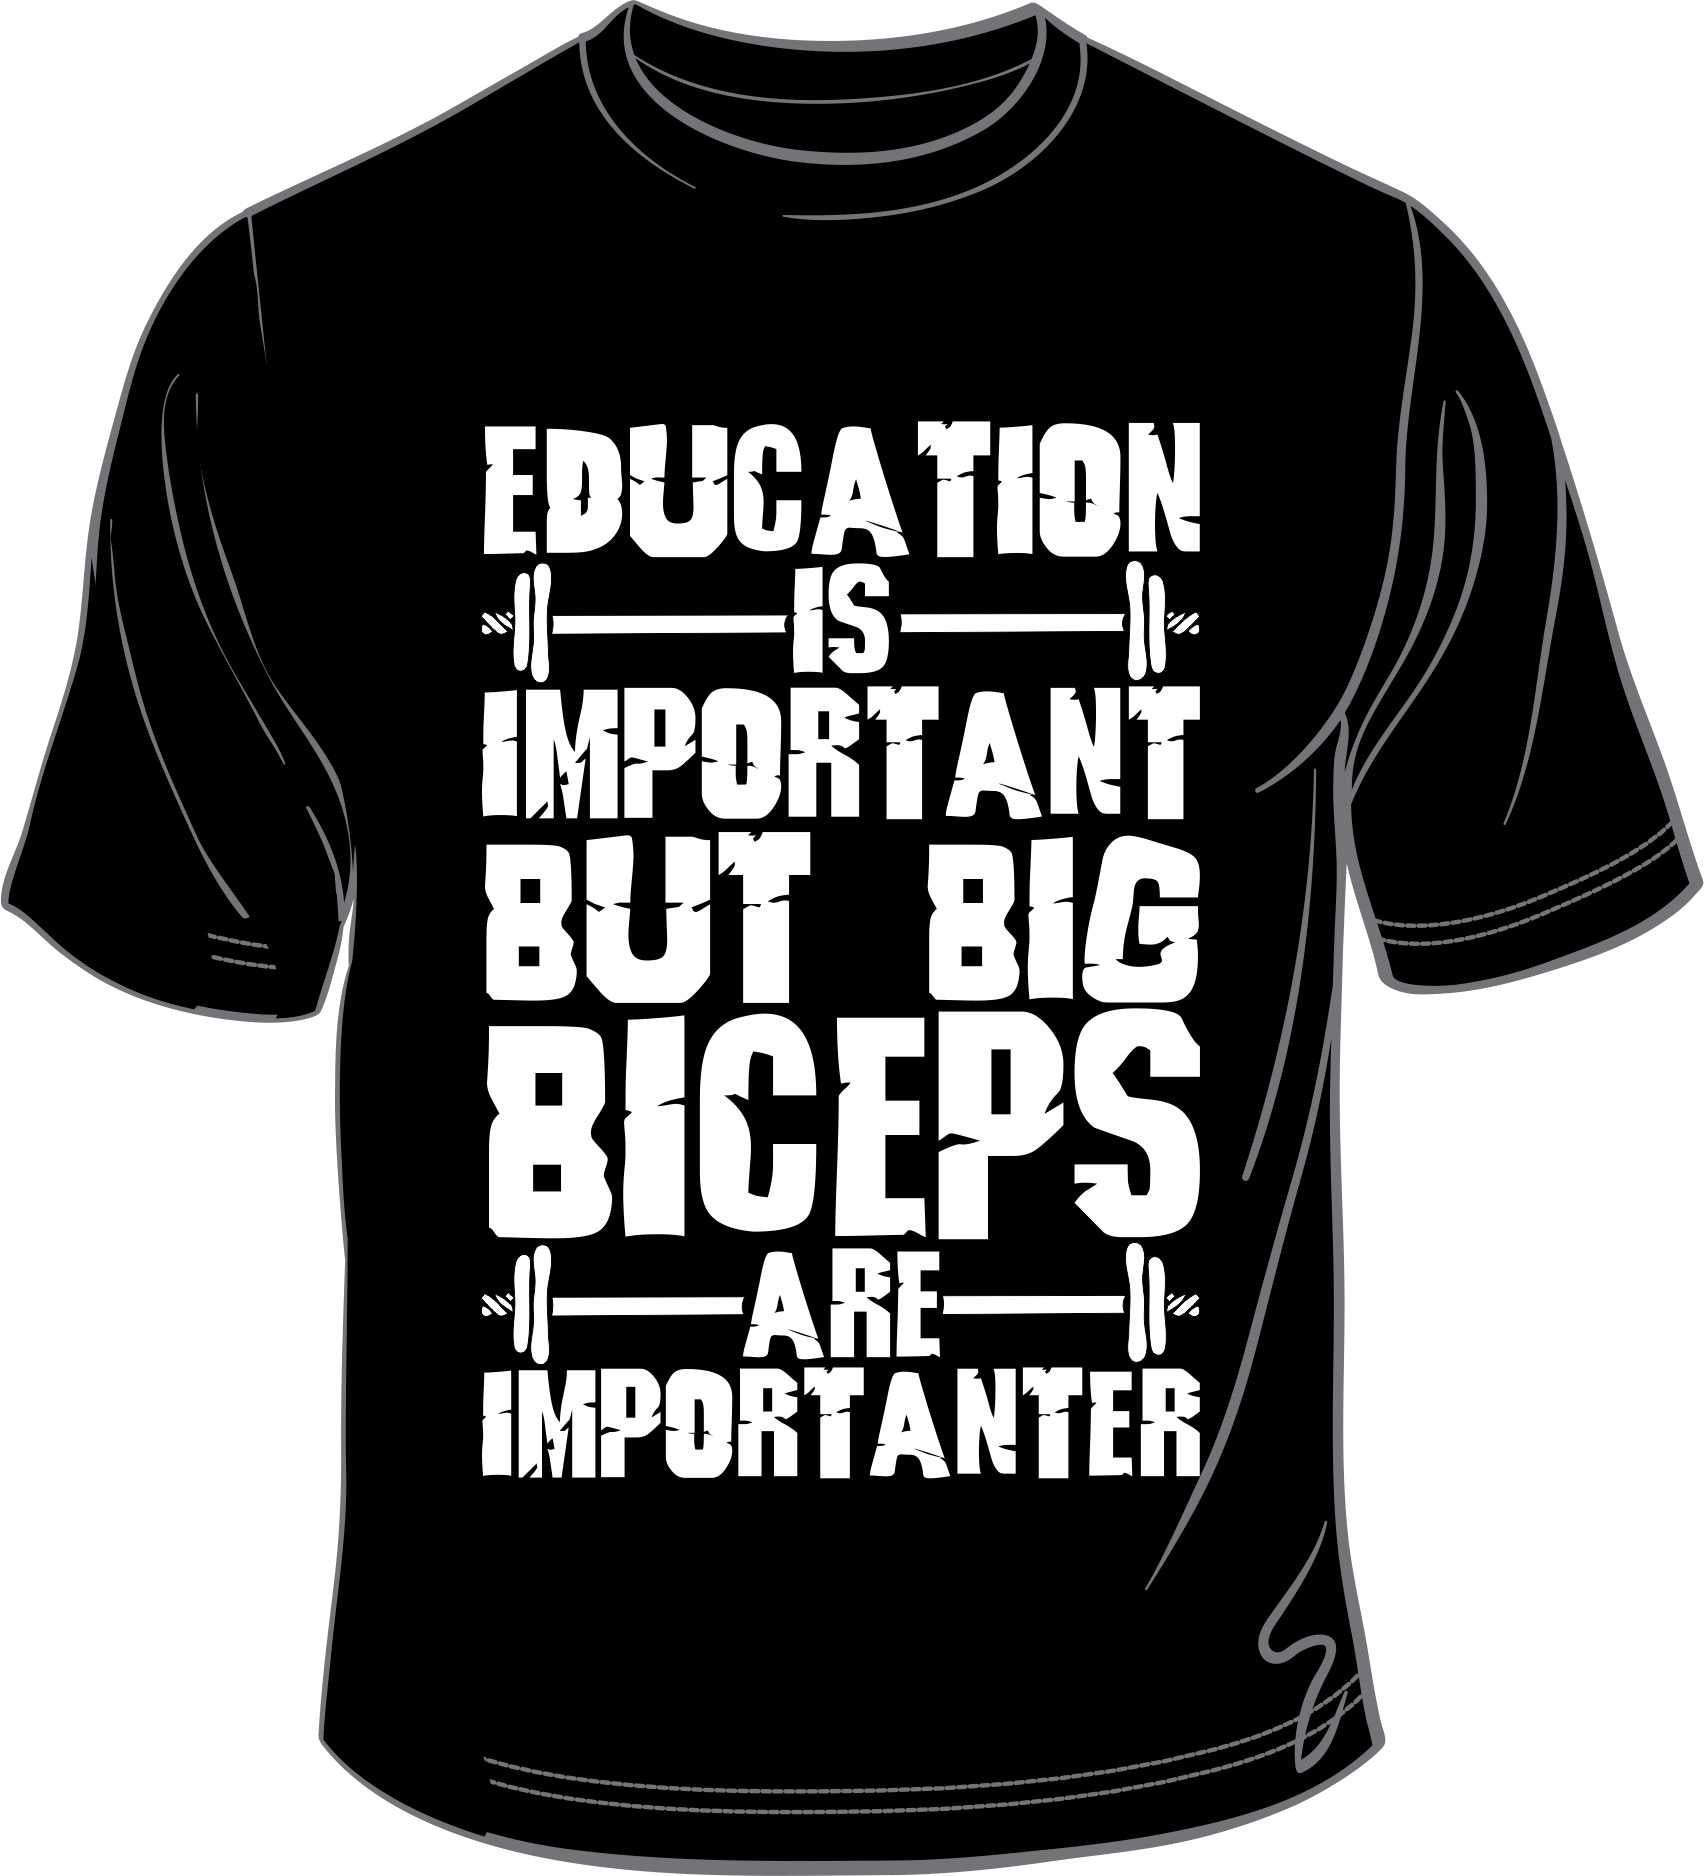 Education is Important But Big Biceps are IMPORTANTER - Gym Printed T-Shirt/Vest